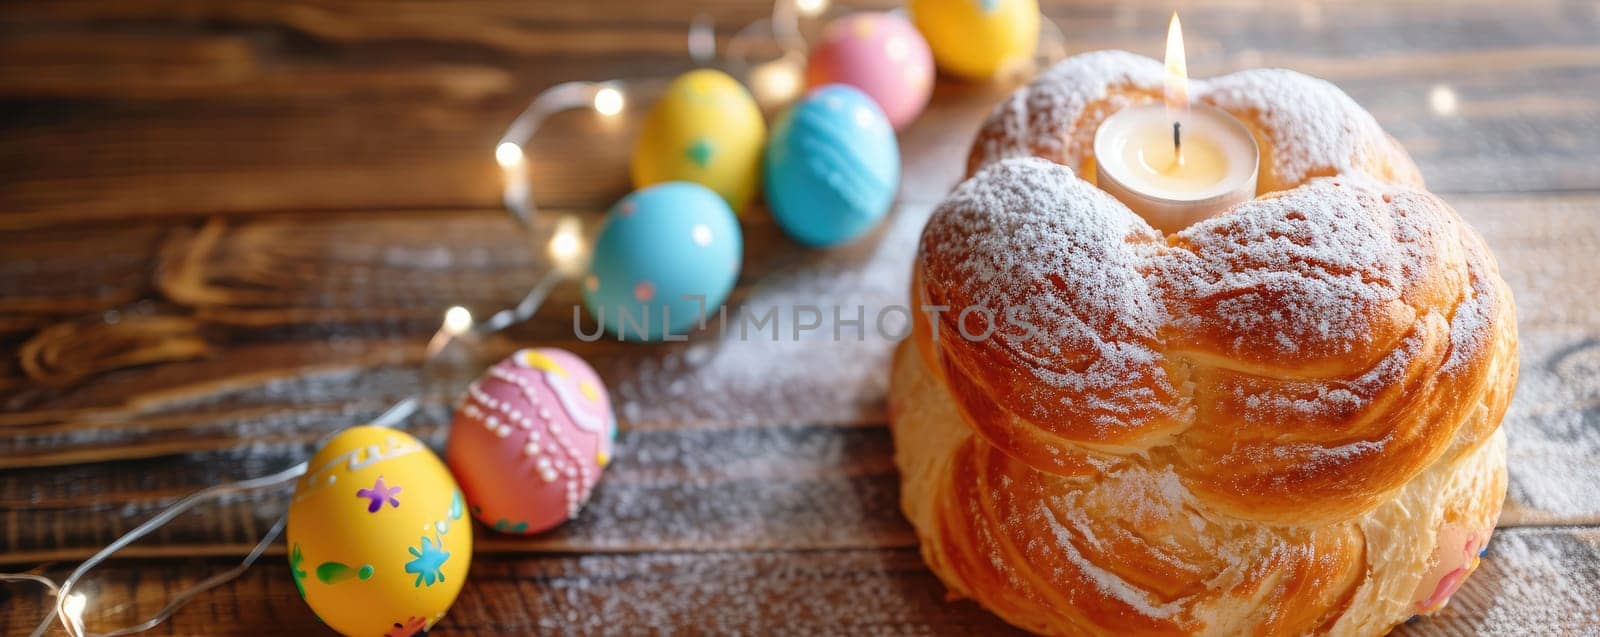 Easter cake and painted eggs on wooden background by Yurich32